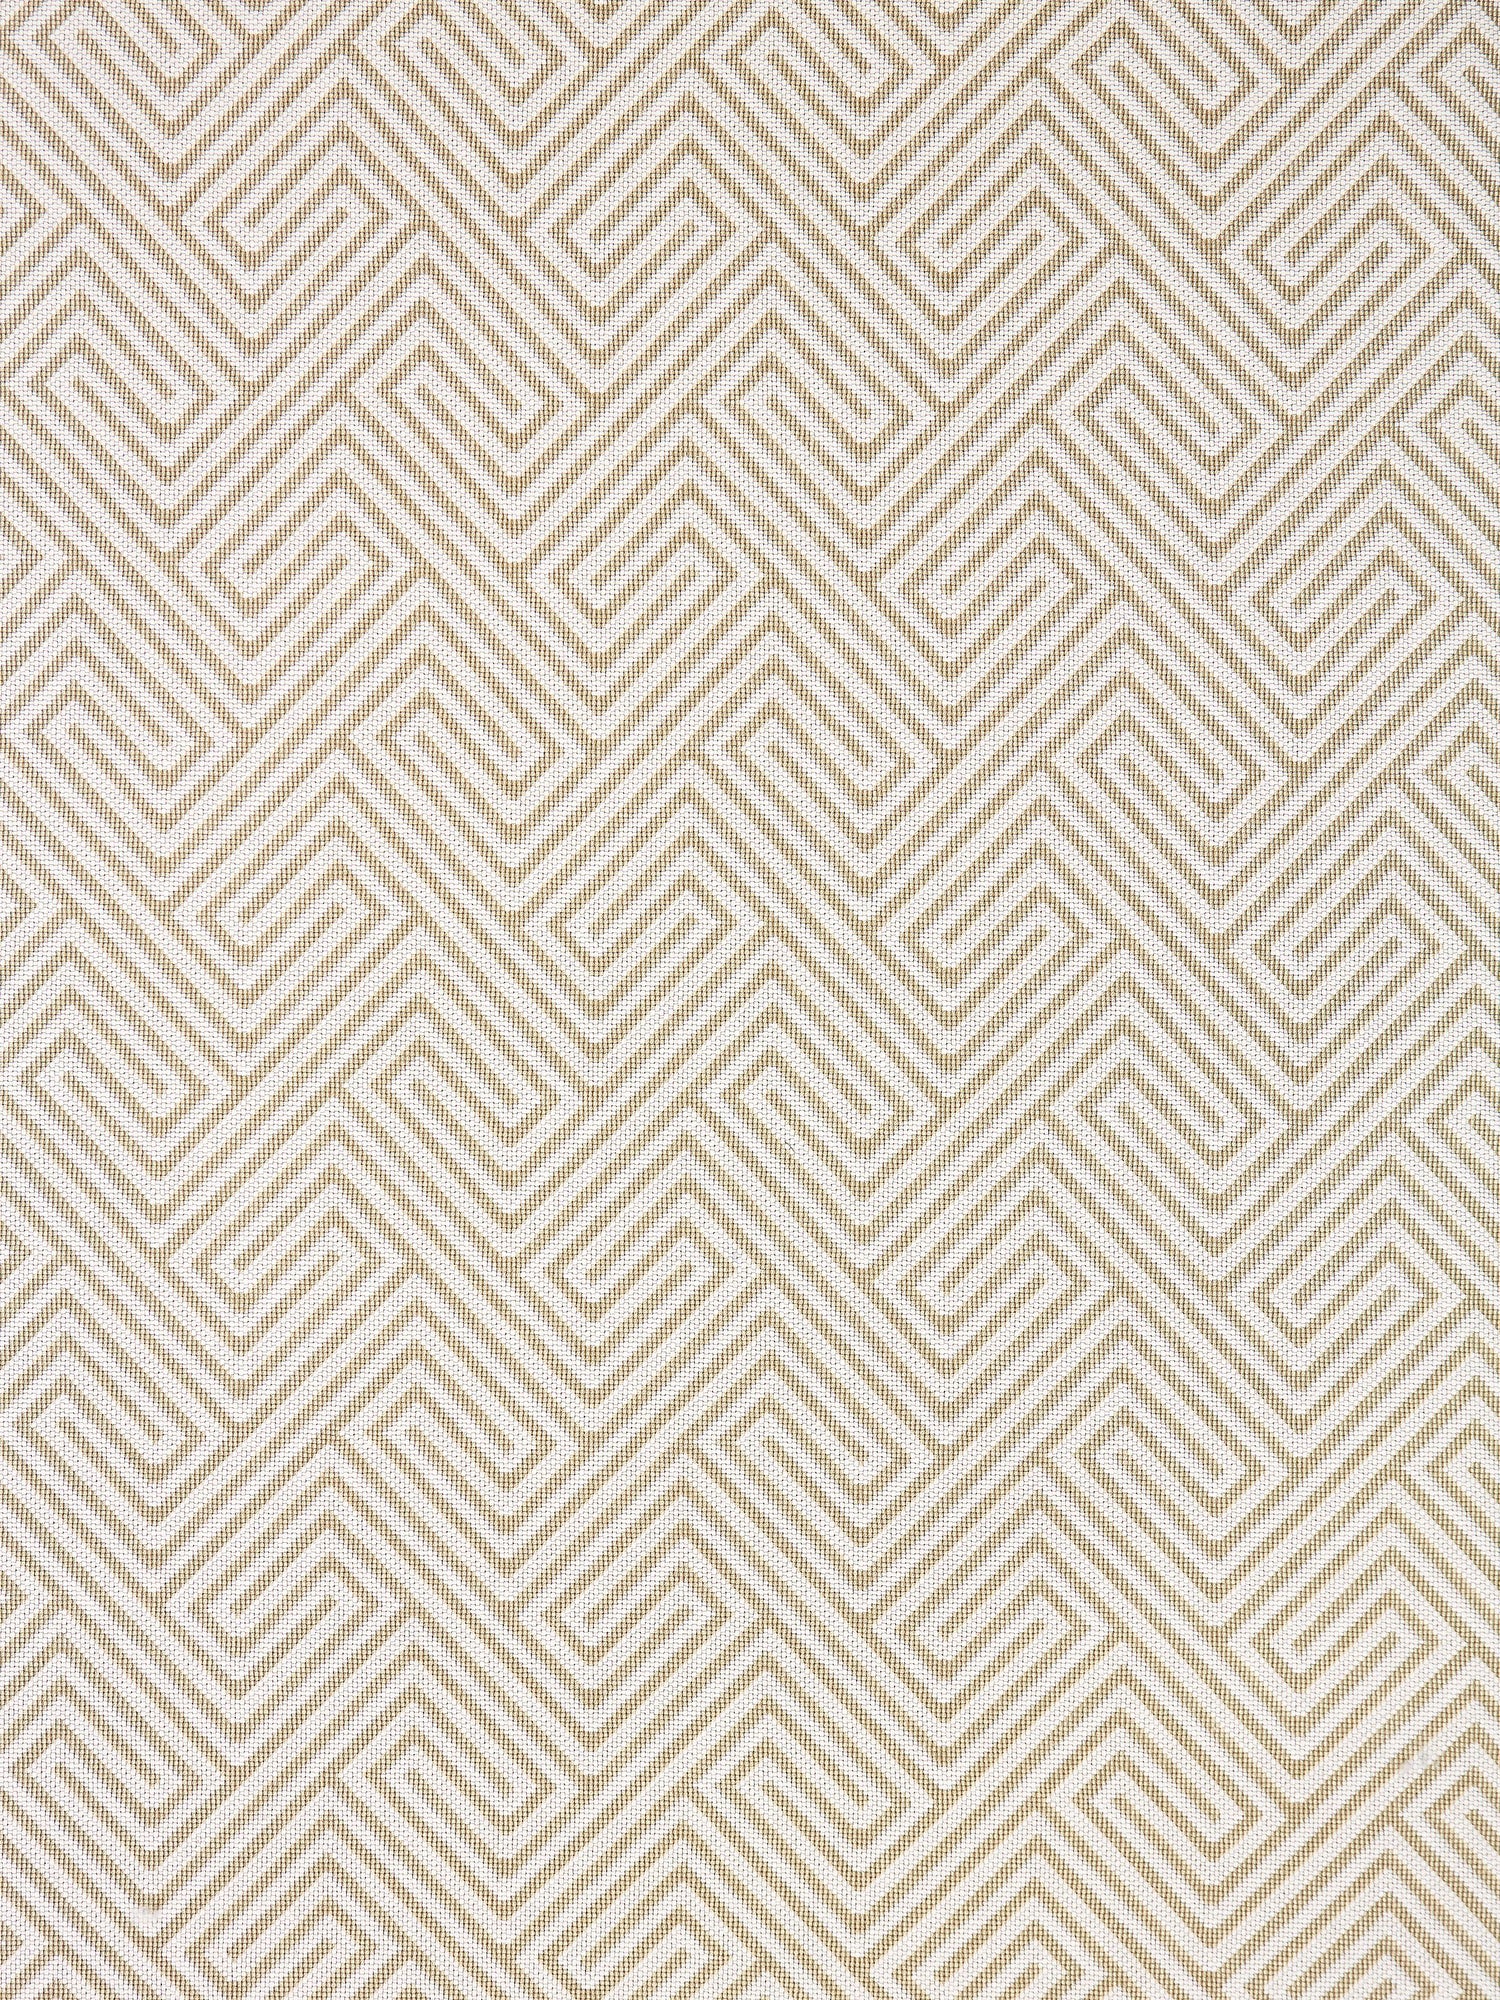 Labyrinth Weave fabric in sand color - pattern number SC 000127030 - by Scalamandre in the Scalamandre Fabrics Book 1 collection